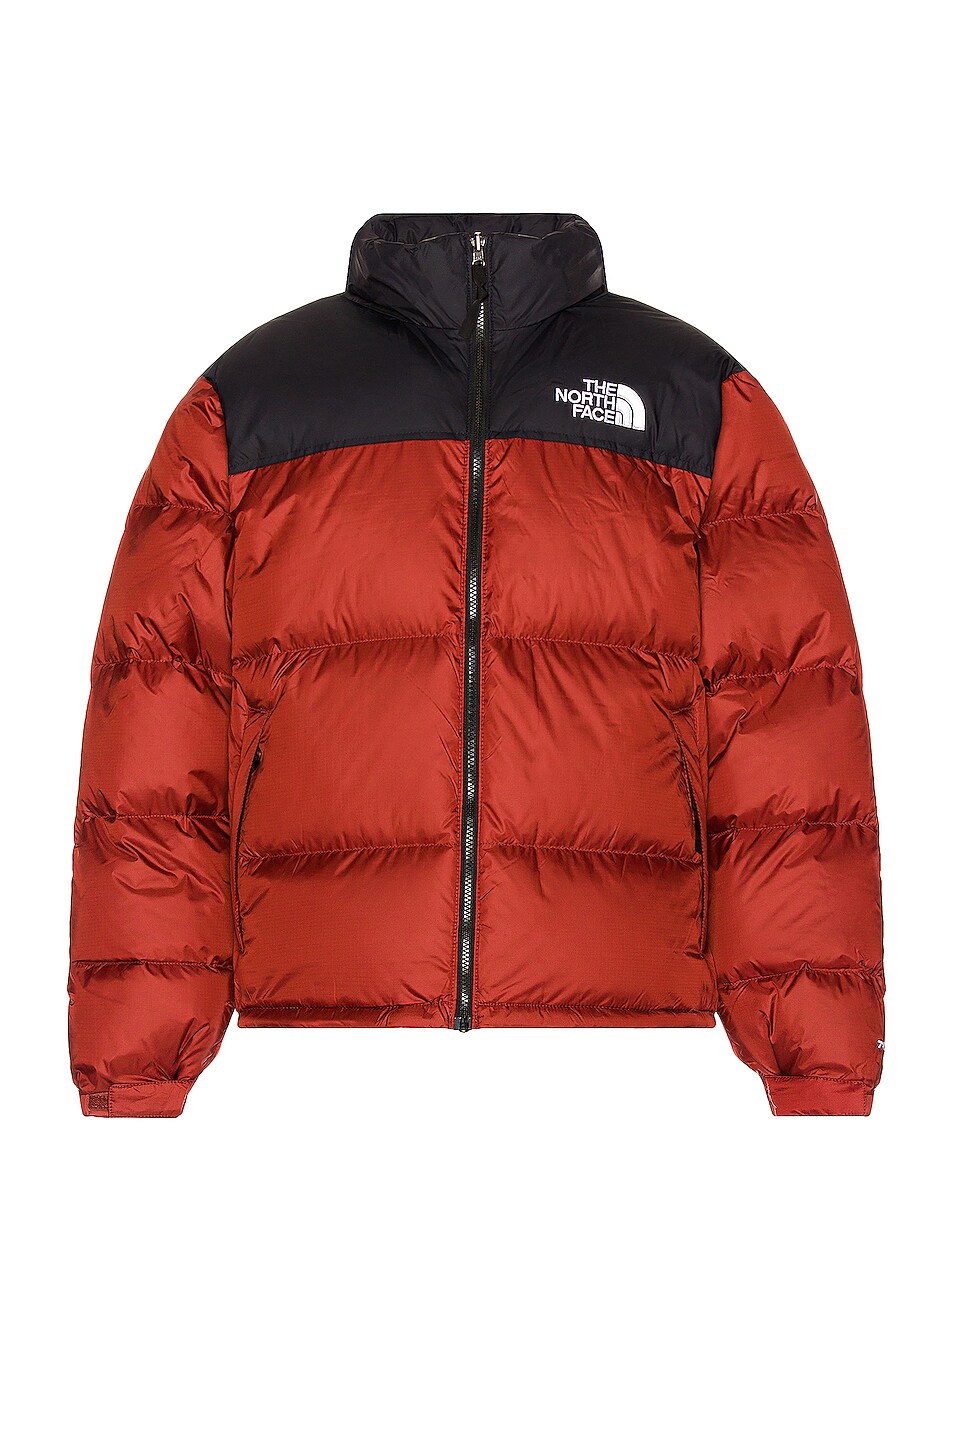 Image 1 of The North Face 1996 Retro Nuptse Jacket in Brick House Red